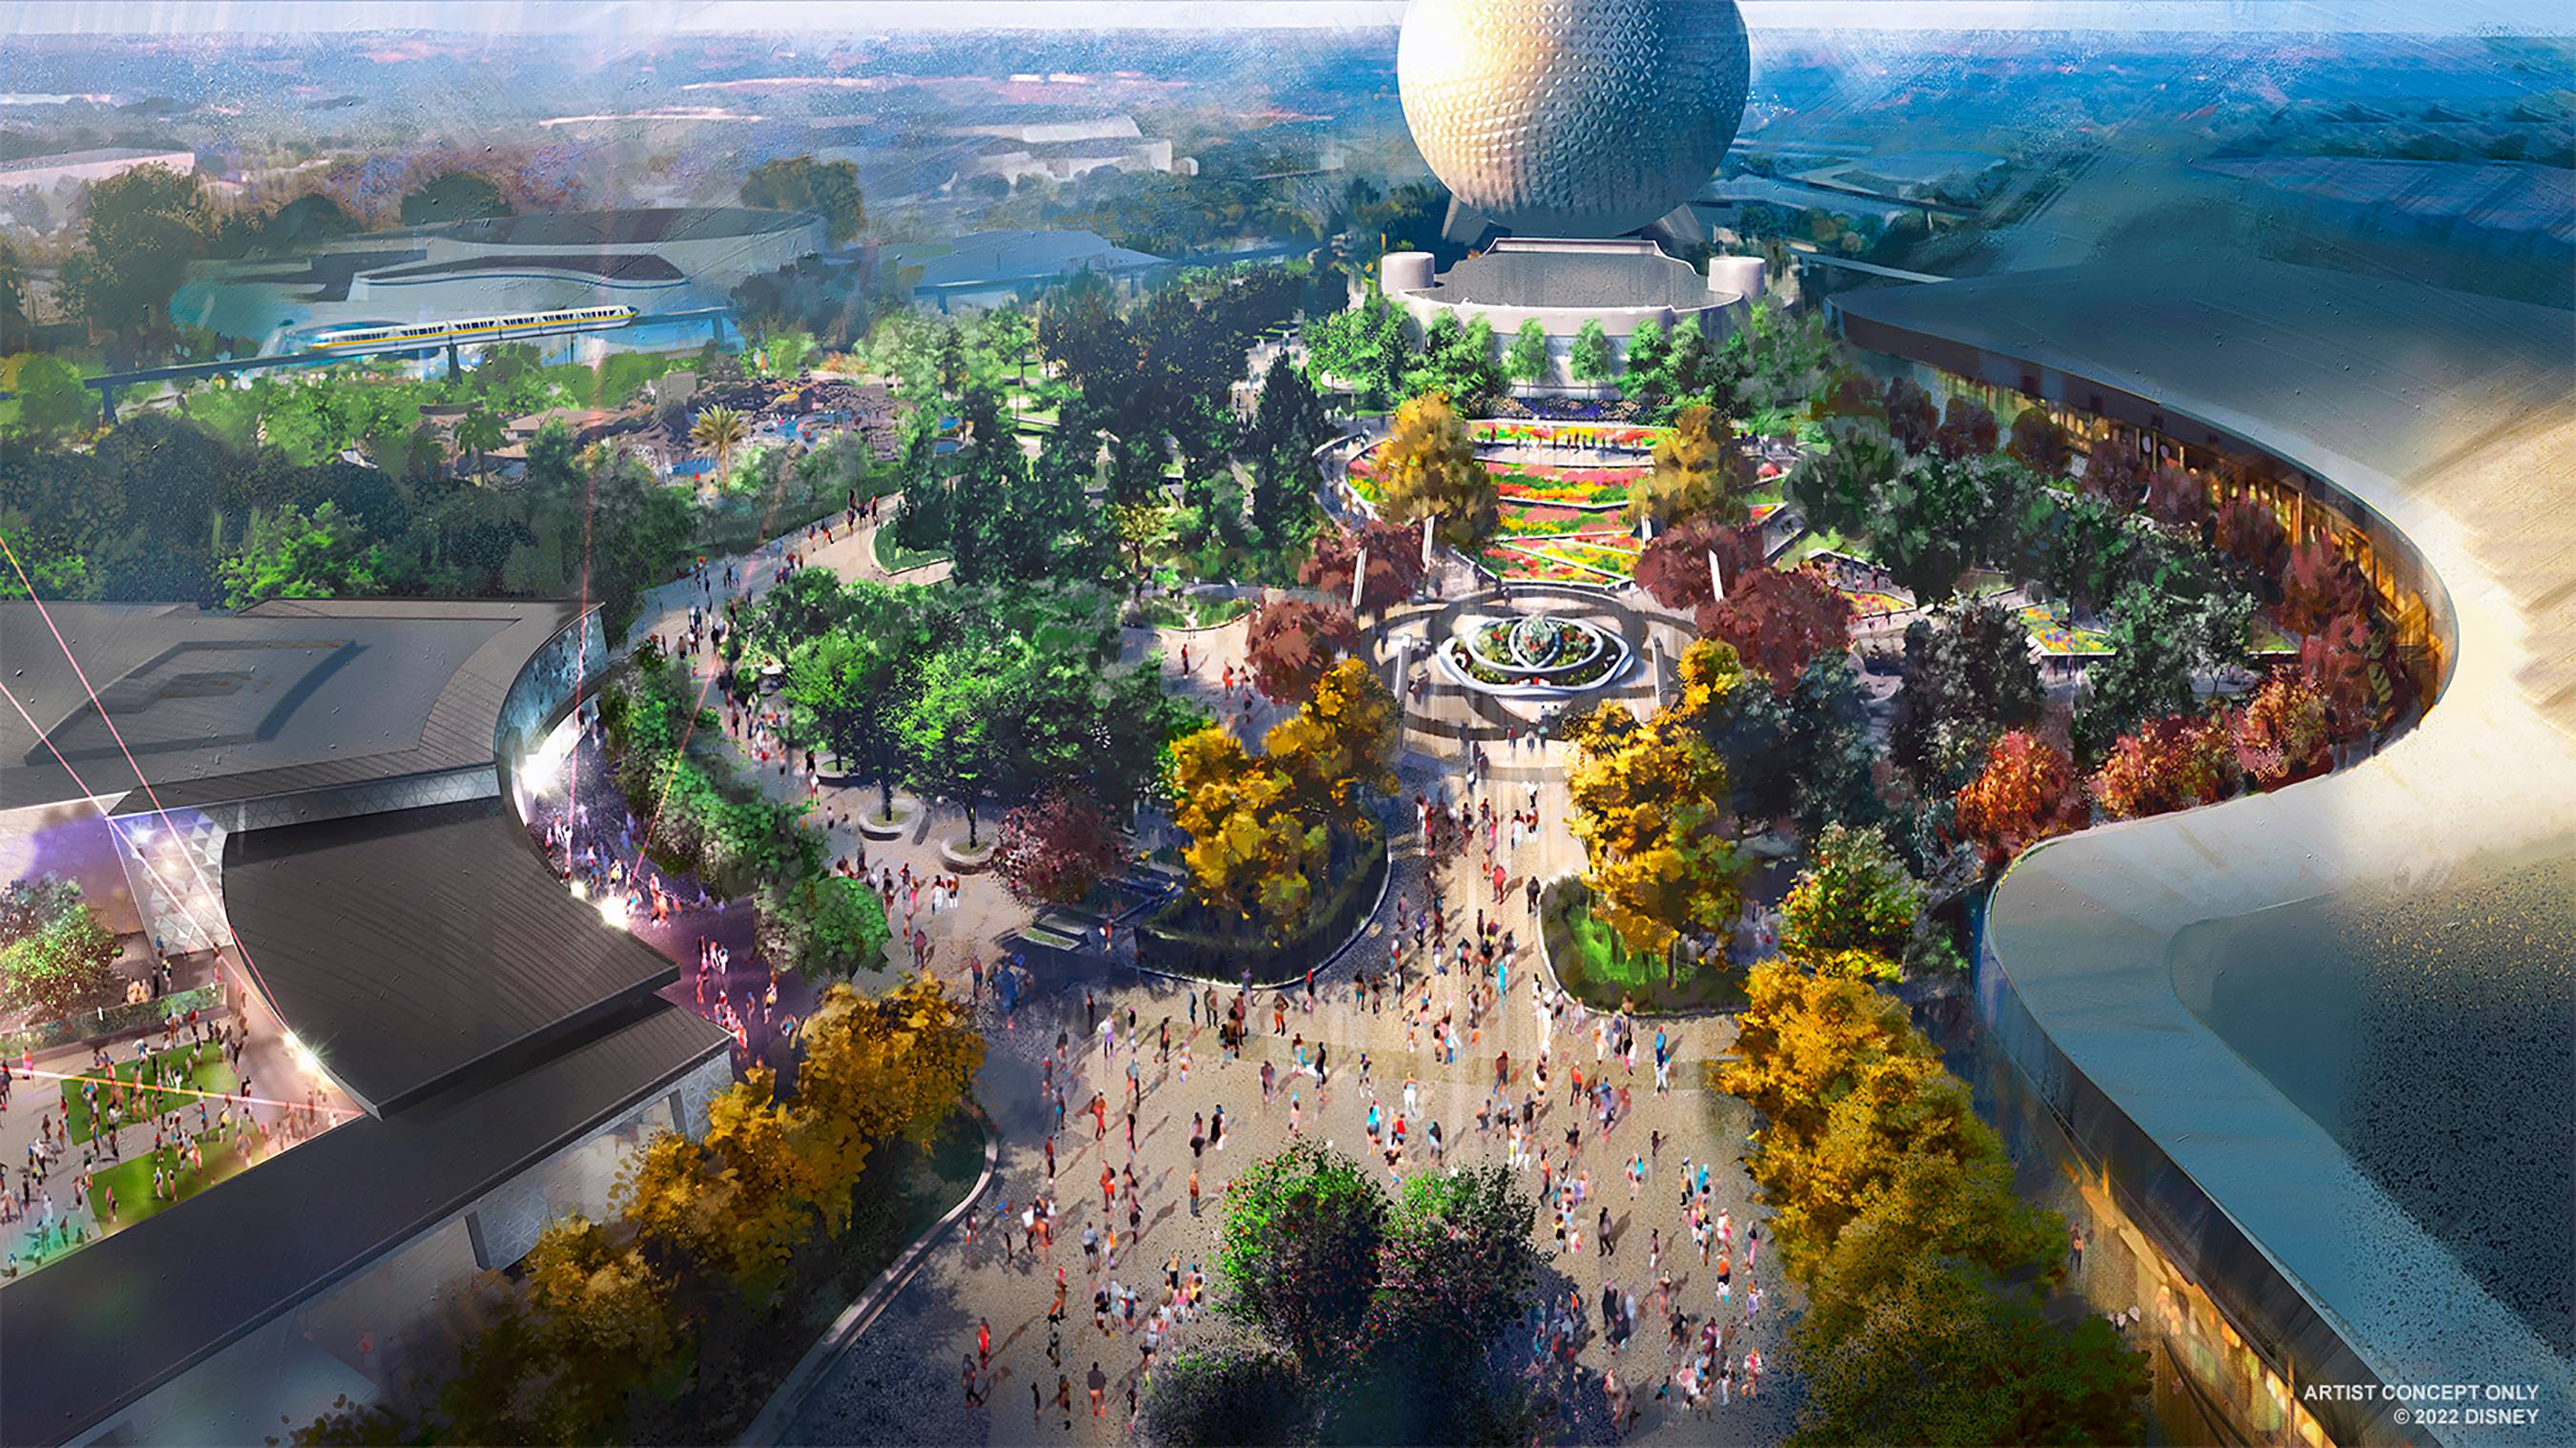 EPCOT's lead Imagineer talks more about the new World Celebration plans